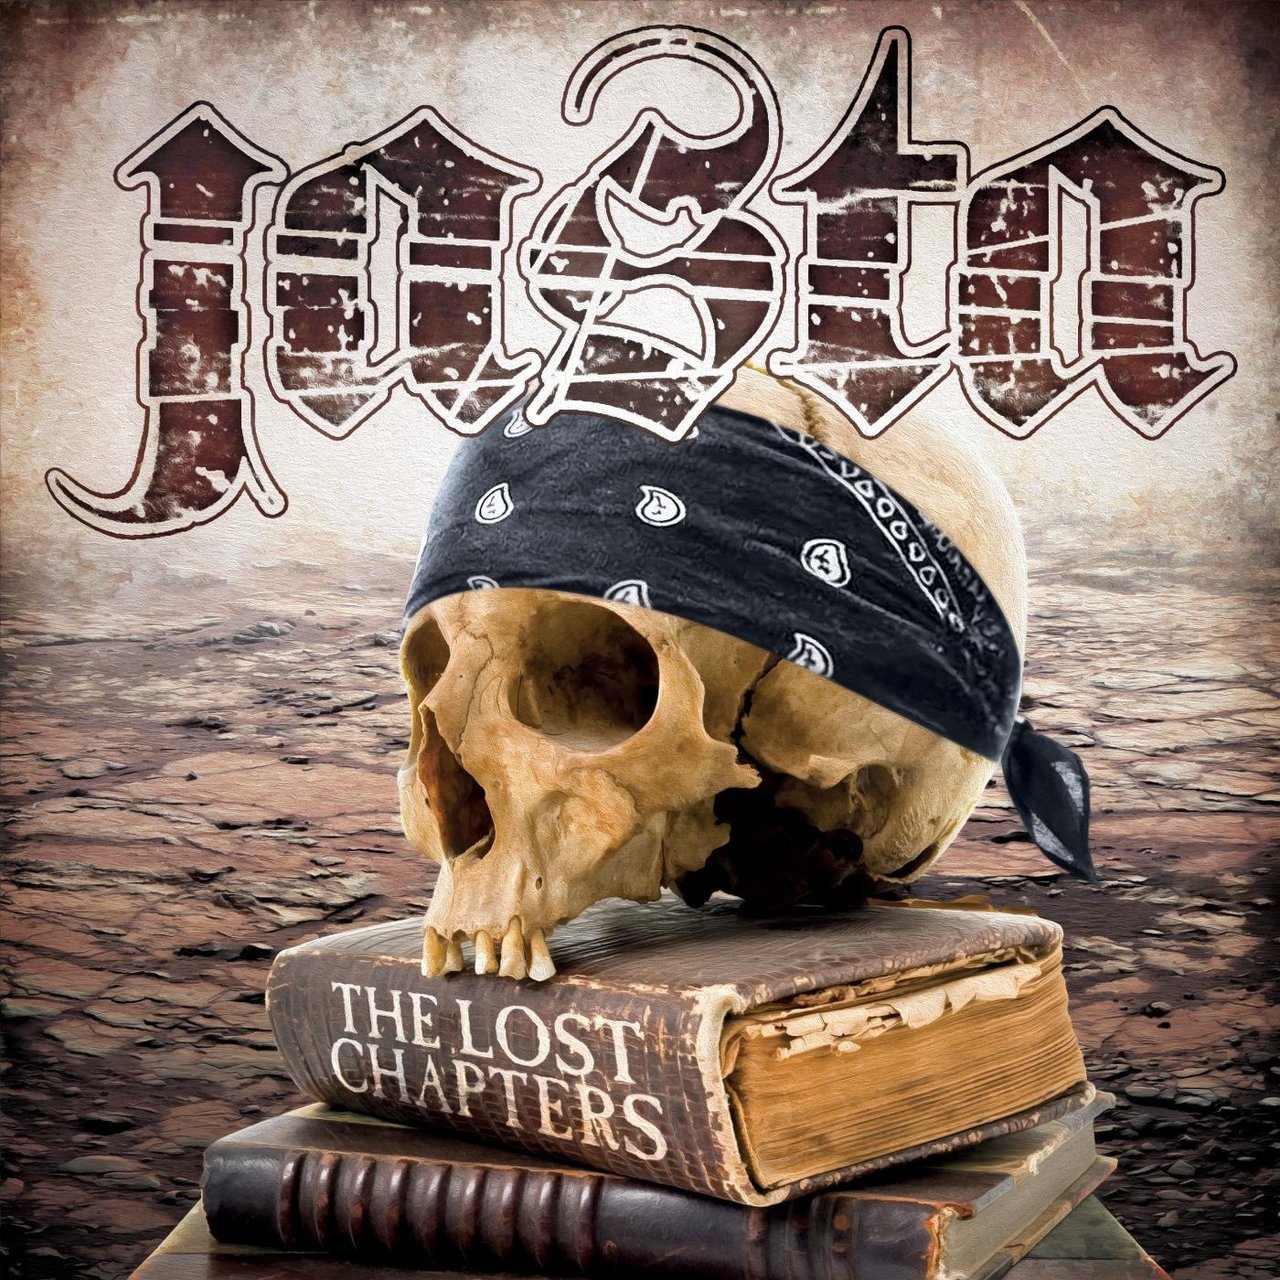 Jasta - The Lost Chapters (2017) FLAC Download